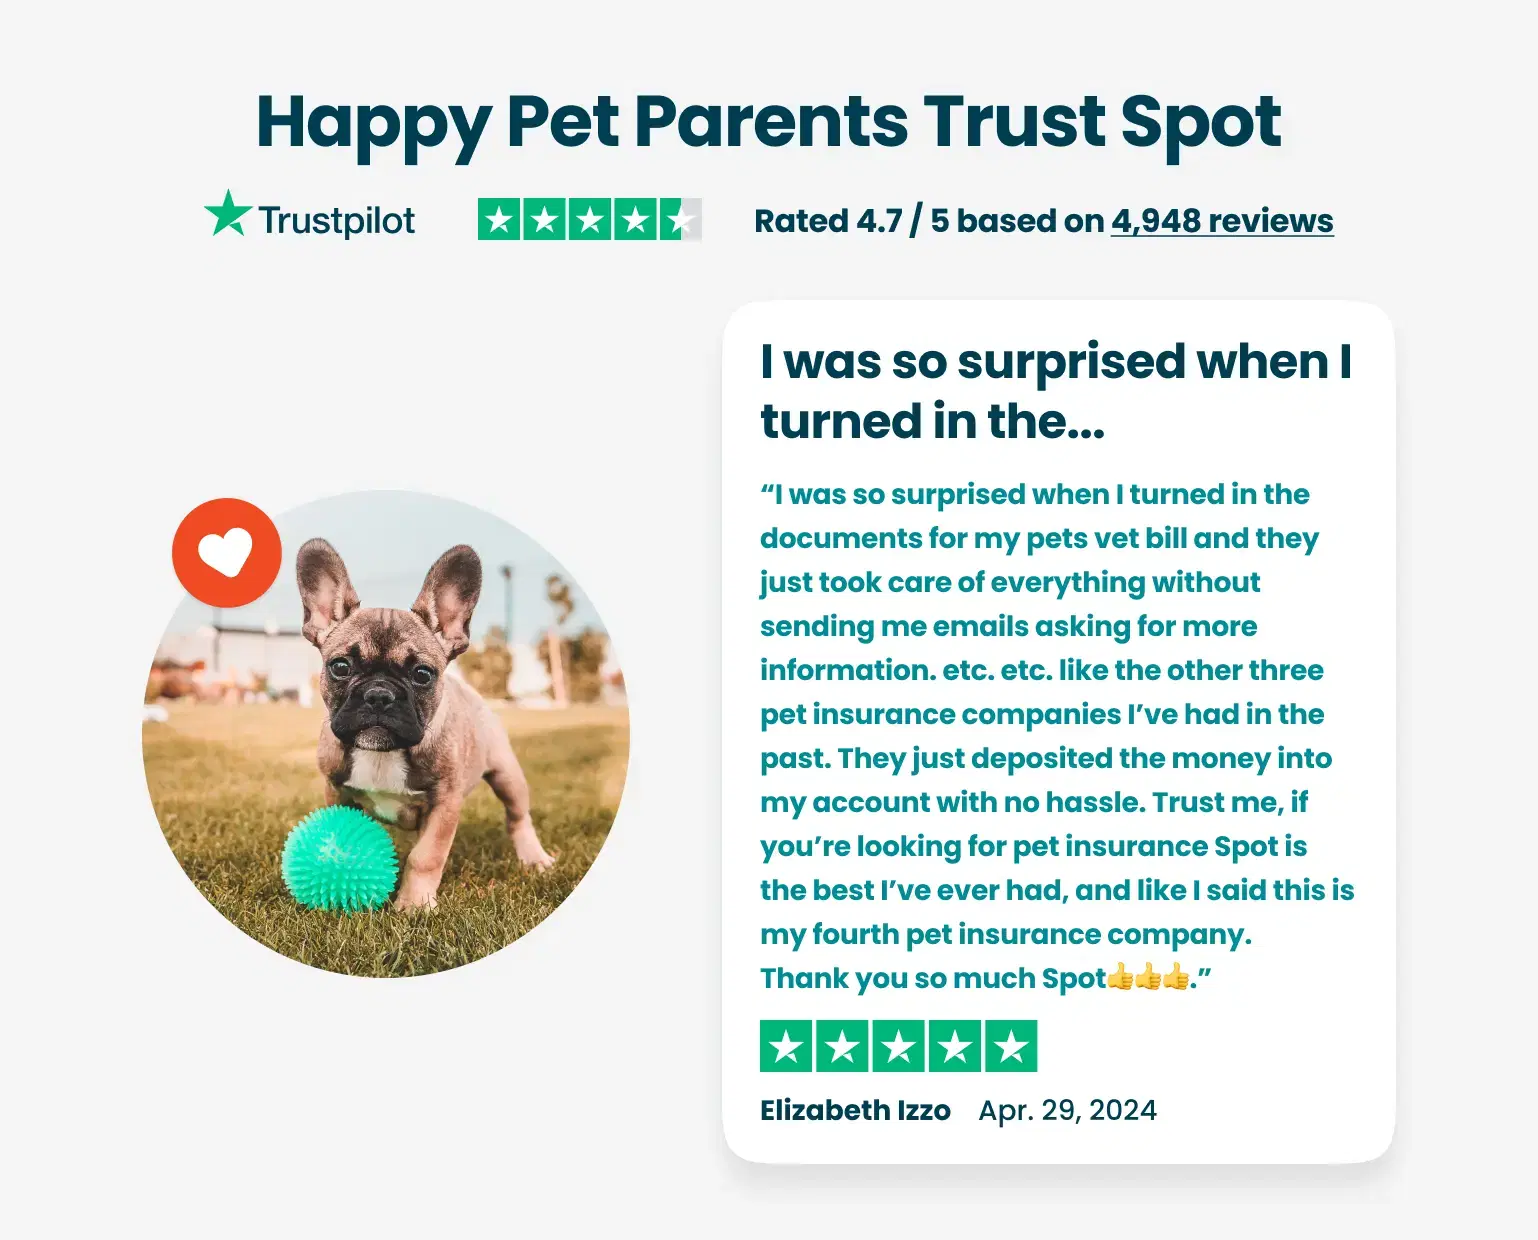 A Trustpilot review shown beside an image of a dog playing with a green ball praises Spot pet insurance.